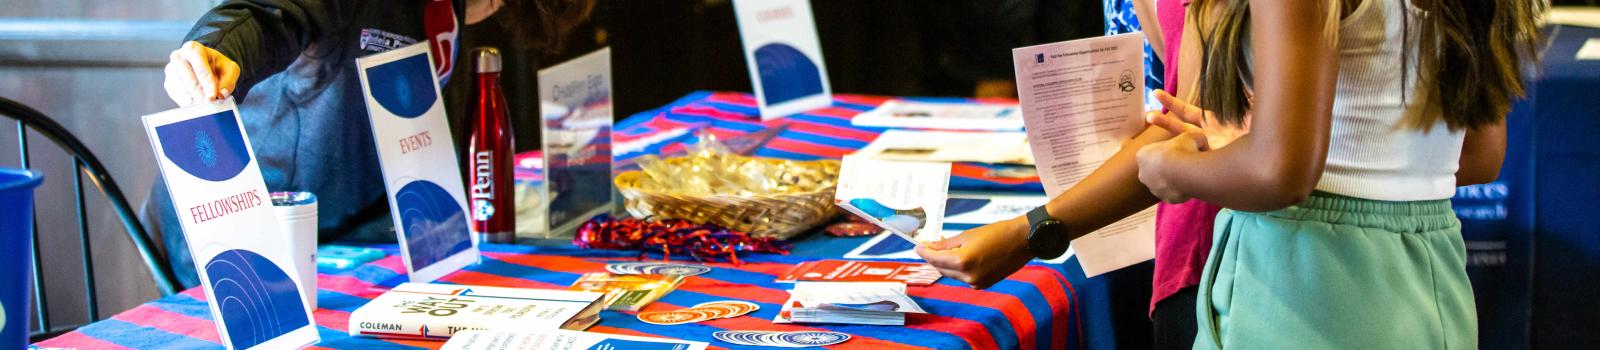  Students are at a Penn event table, checking out information on the event. They're talking to a staff member wearing a Penn mask. The table is covered with colorful materials and brochures.